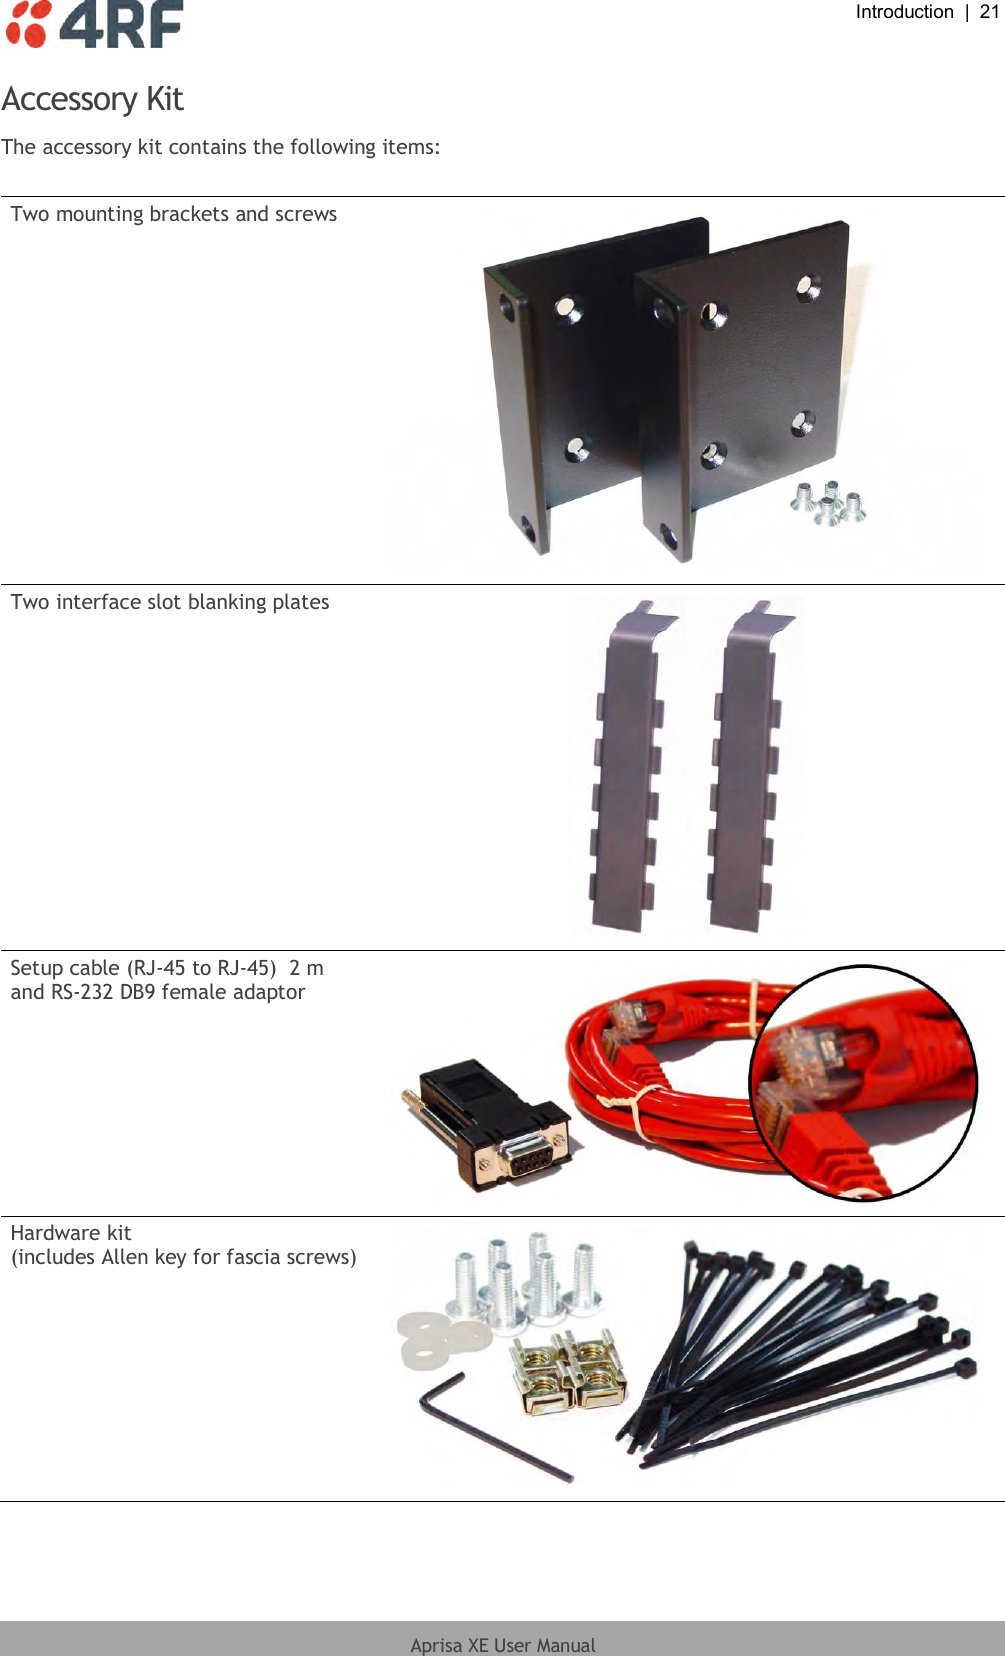  Introduction  |  21  Aprisa XE User Manual  Accessory Kit The accessory kit contains the following items:  Two mounting brackets and screws  Two interface slot blanking plates  Setup cable (RJ-45 to RJ-45)  2 m and RS-232 DB9 female adaptor  Hardware kit (includes Allen key for fascia screws)  